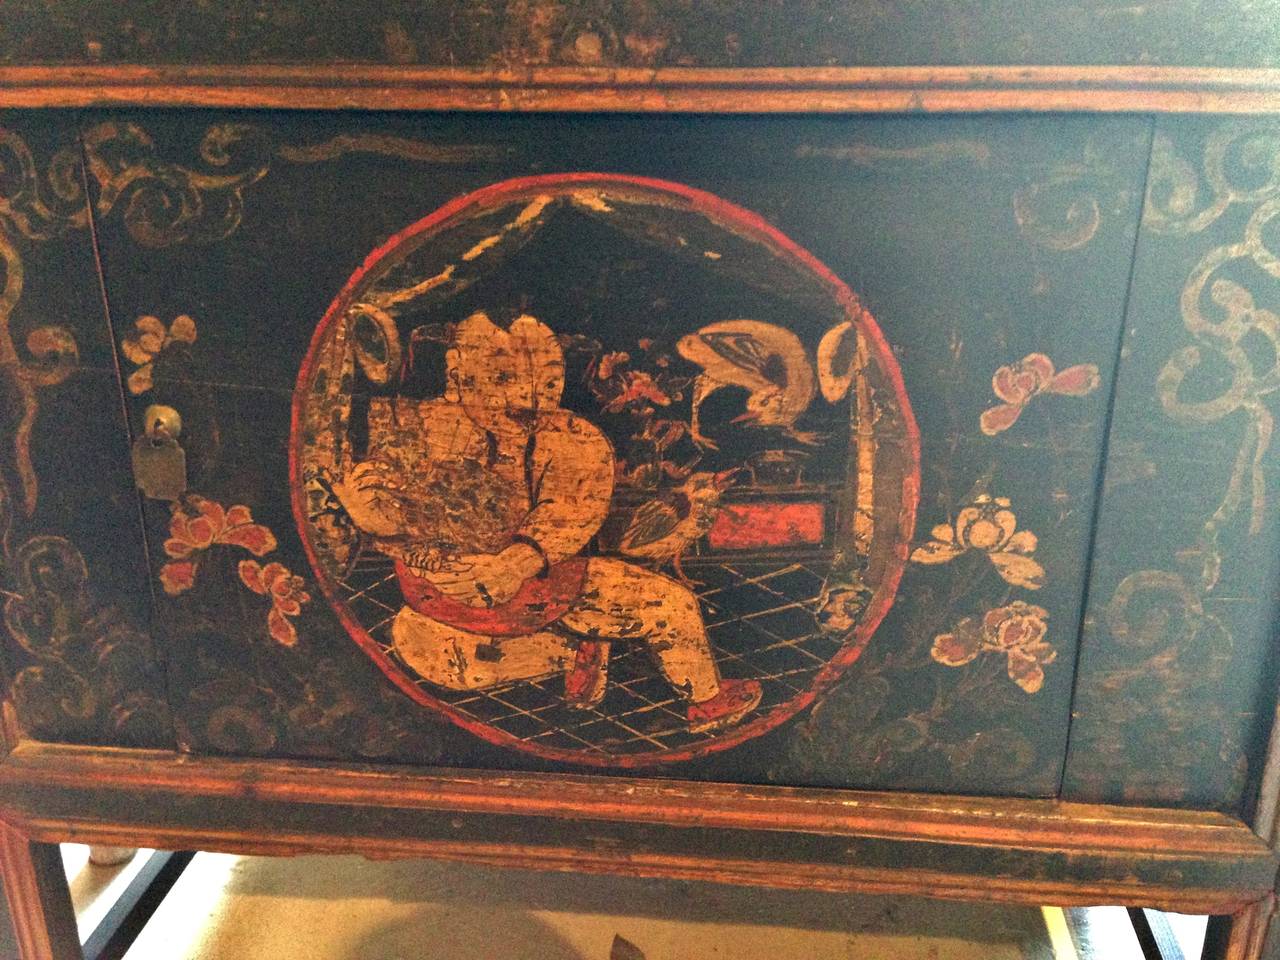 A wonderful piece from Northwestern China's exotic tribal region. Charming, folk artsy images of a chubby boy with birds surrounded by blooming lotuses form a happy, peaceful scene of life. Beautiful contrasting colors and patina. Removable shelf